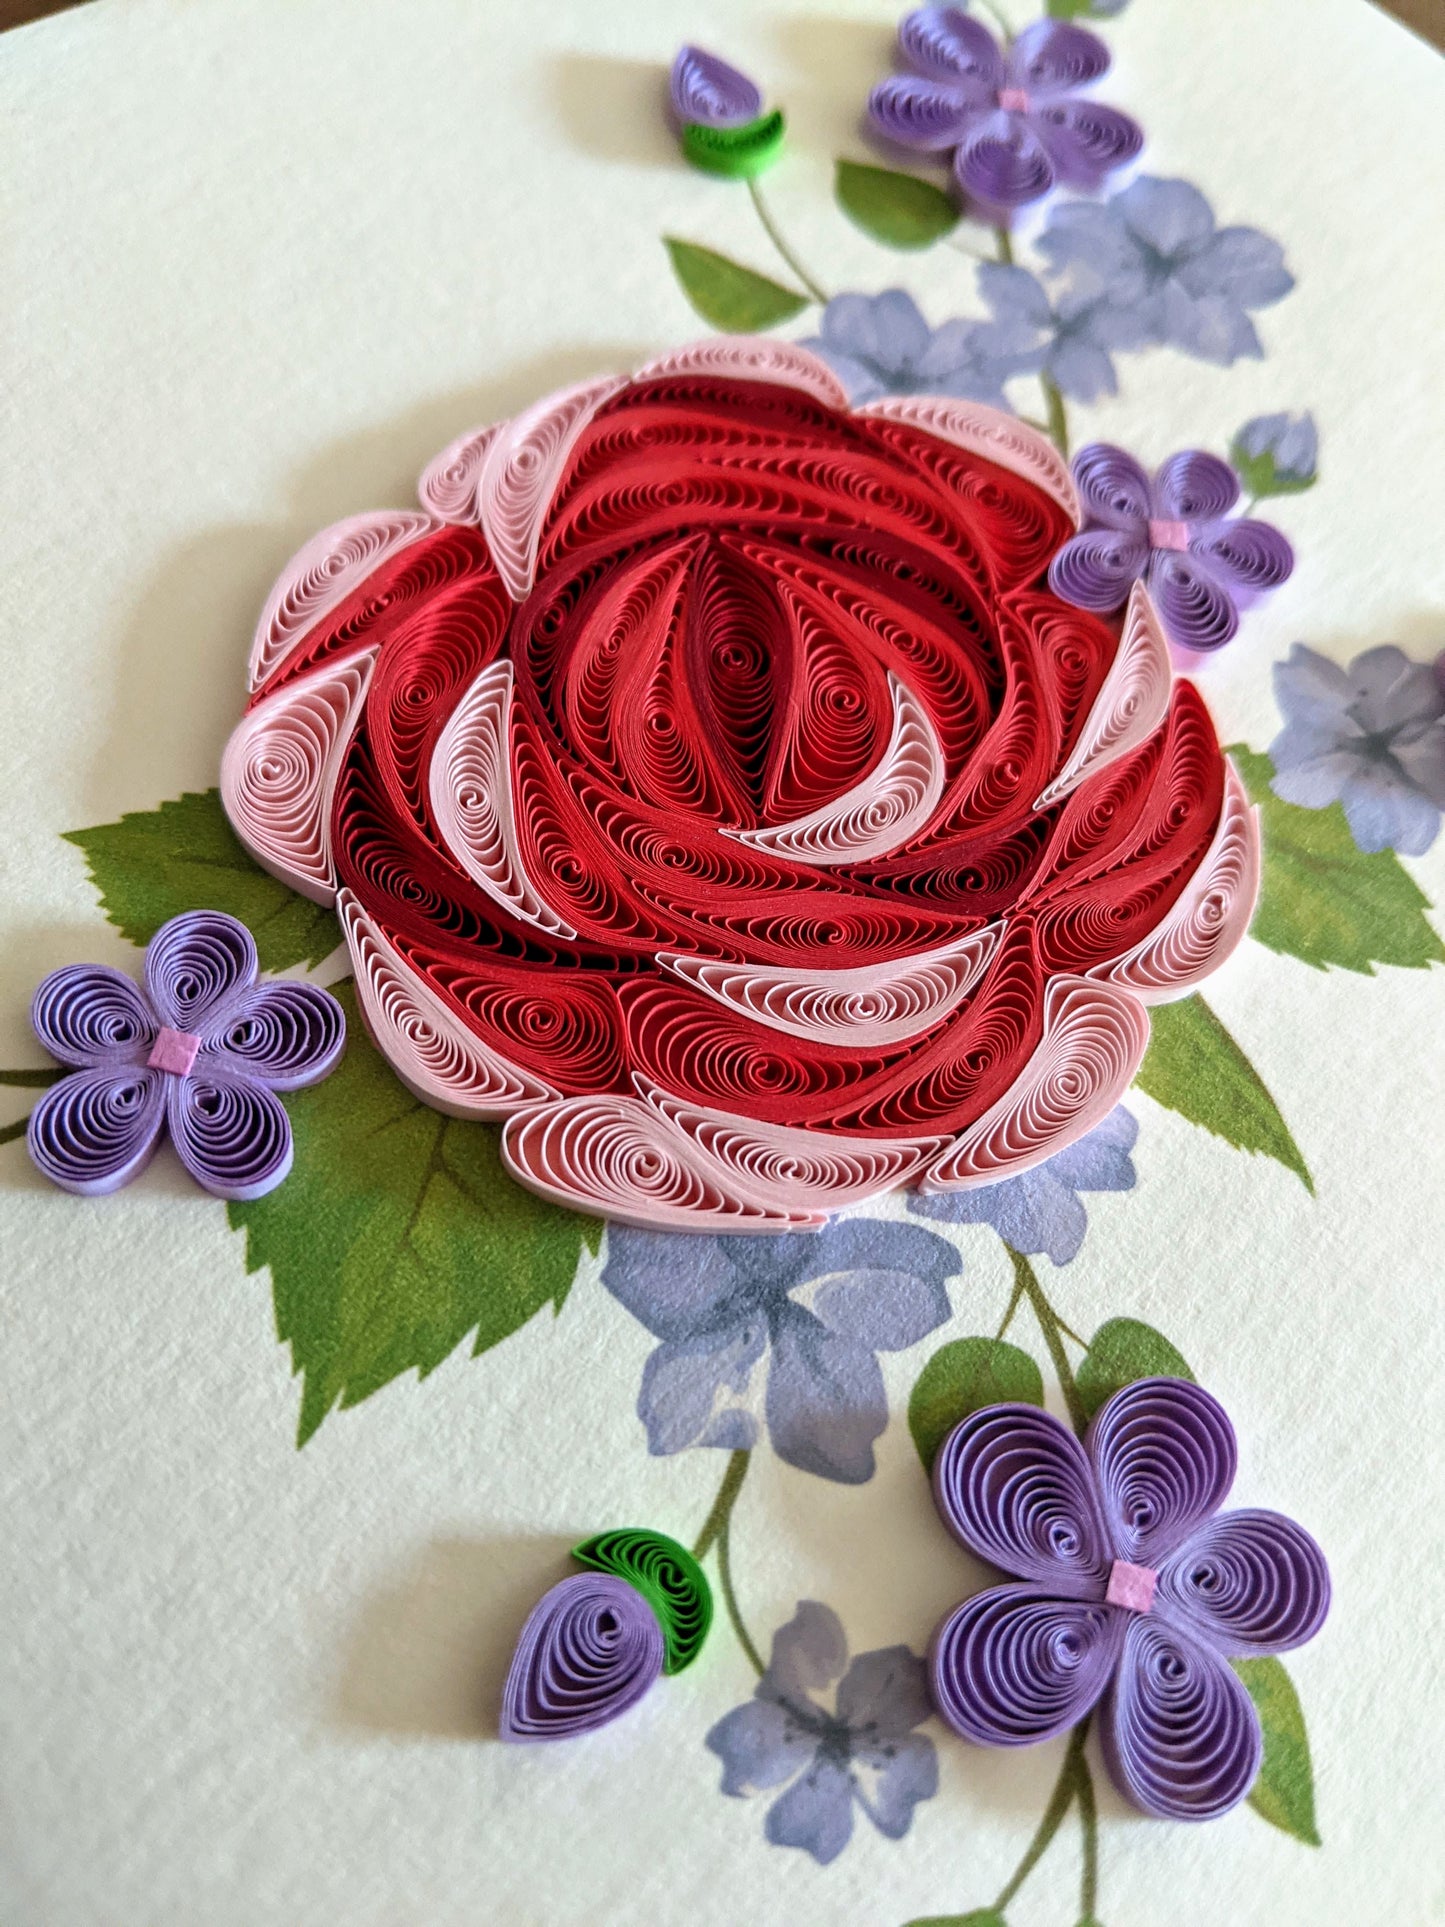 Rose and Flowers Quilling Card